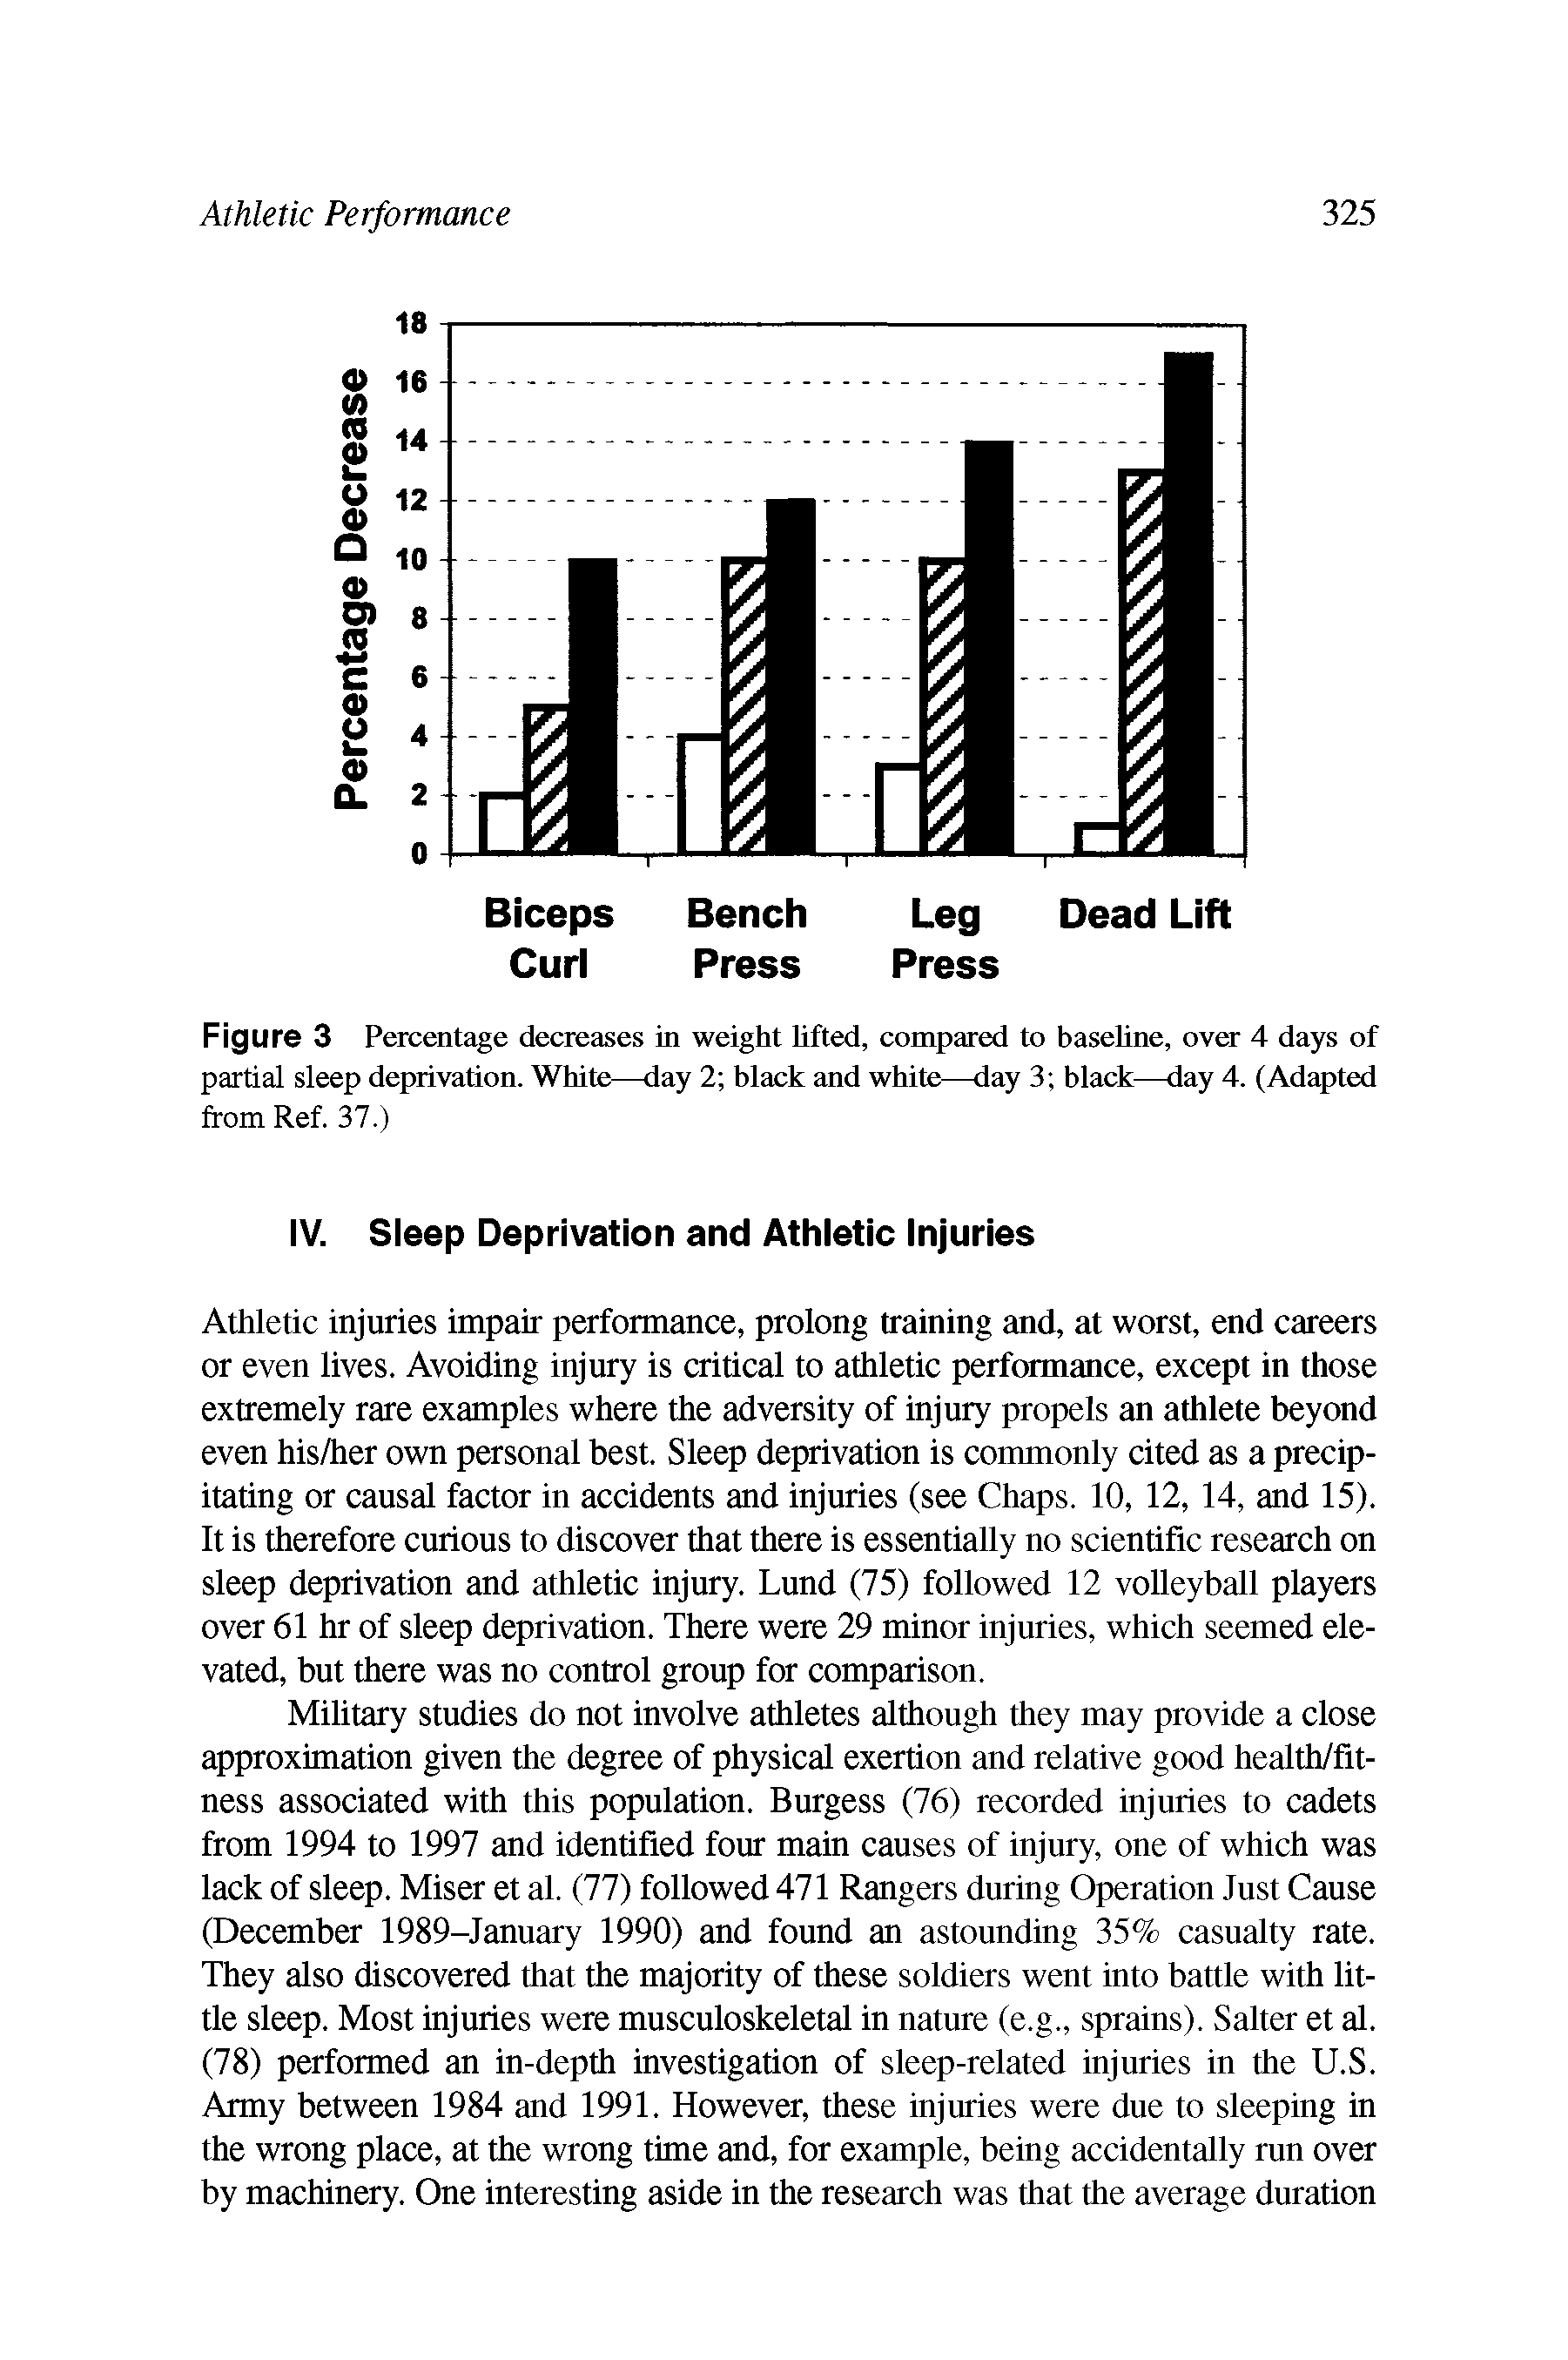 Figure 3 Percentage decreases in weight lifted, compared to baseline, over 4 days of partial sleep deprivation. White—day 2 black and white—day 3 black—day 4. (Adapted from Ref. 37.)...